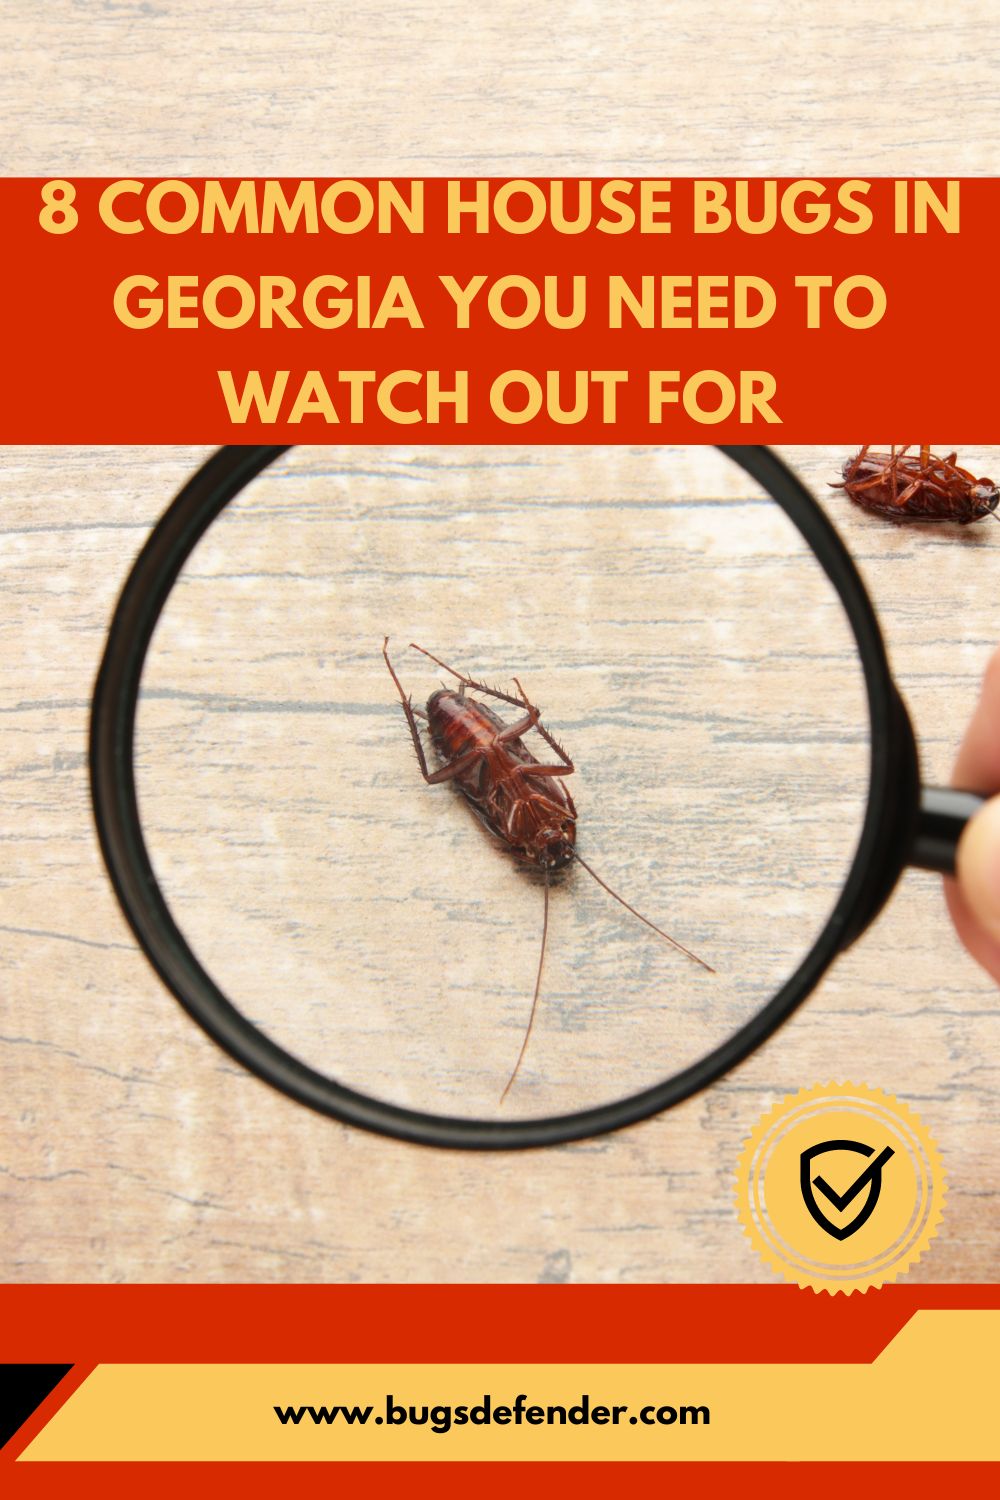 8 Common House Bugs In Georgia You Need To Watch Out For pin 2